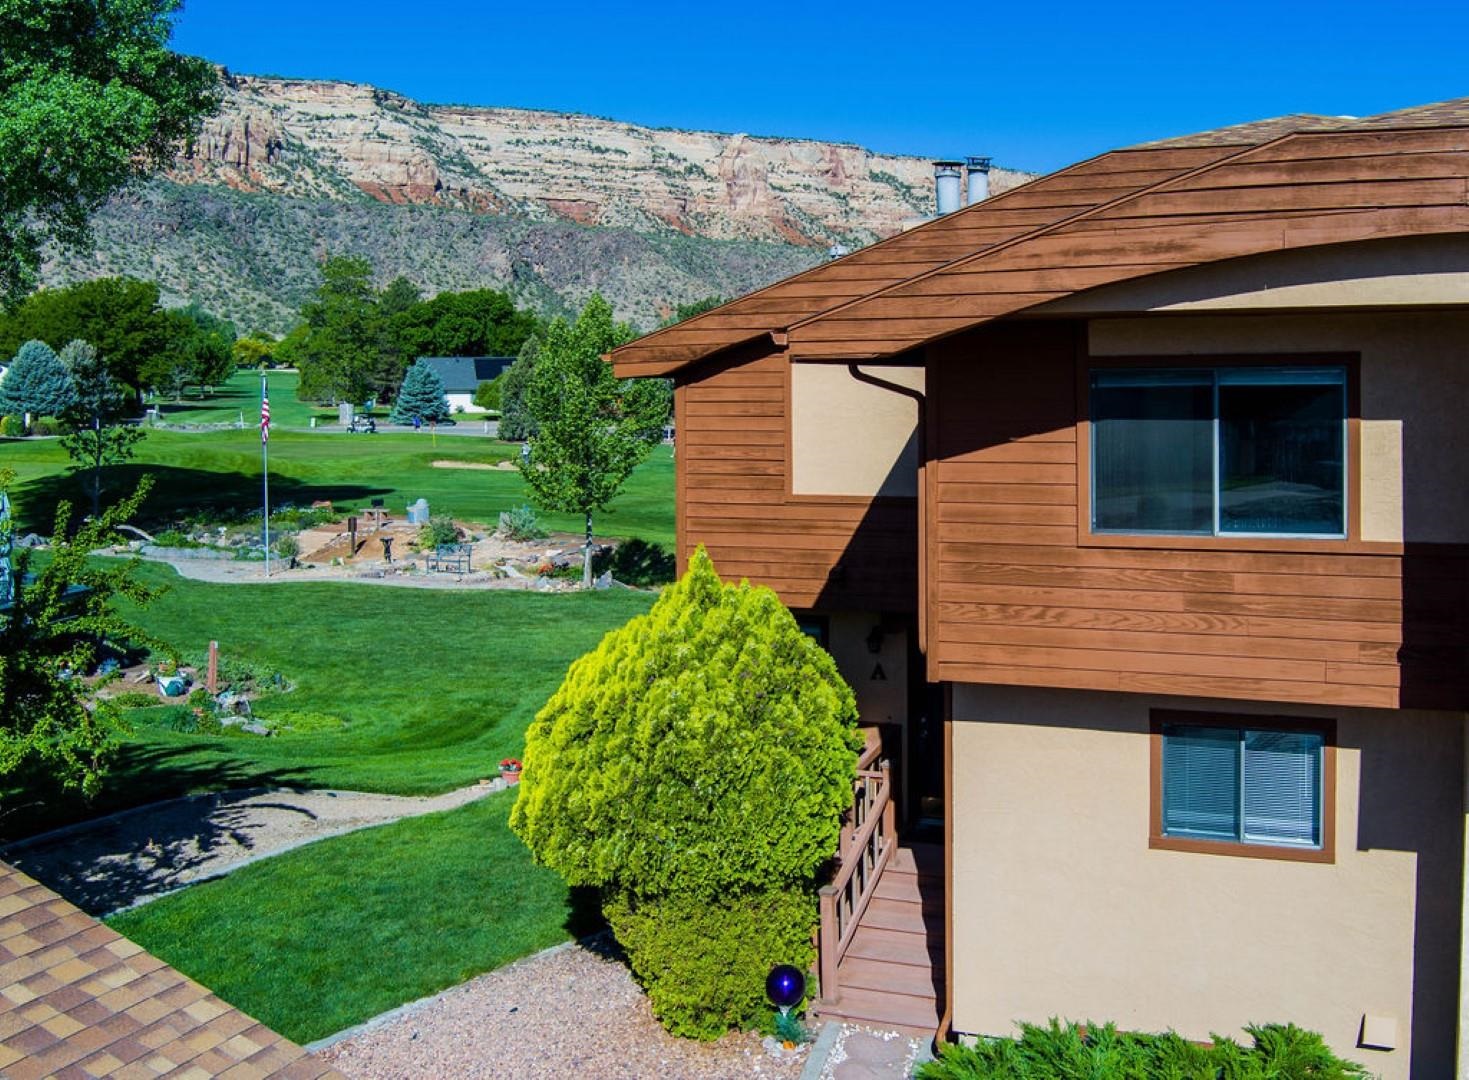 What could be better than owning a lovely spacious condo on Tiara Rado Golf Course with stunning views of the Colorado National Monument? Here is your chance! This three story end unit with 3 bedrooms, 3 ½ baths, two living areas, and large kitchen is perfectly situated on Hole #2. The primary with bath and one additional bedroom and bath are located on the upper level, with one bedroom and bath on the lower level. The home has been freshly painted and includes wood laminate flooring, carpet and all appliances, as well as a pellet stove on the main level, and a wood-burning fireplace on the lower level. Close to hiking trails, this home is perfect for live-in owners or investors. This is the lifestyle you’ve dreamed about – come see it today!